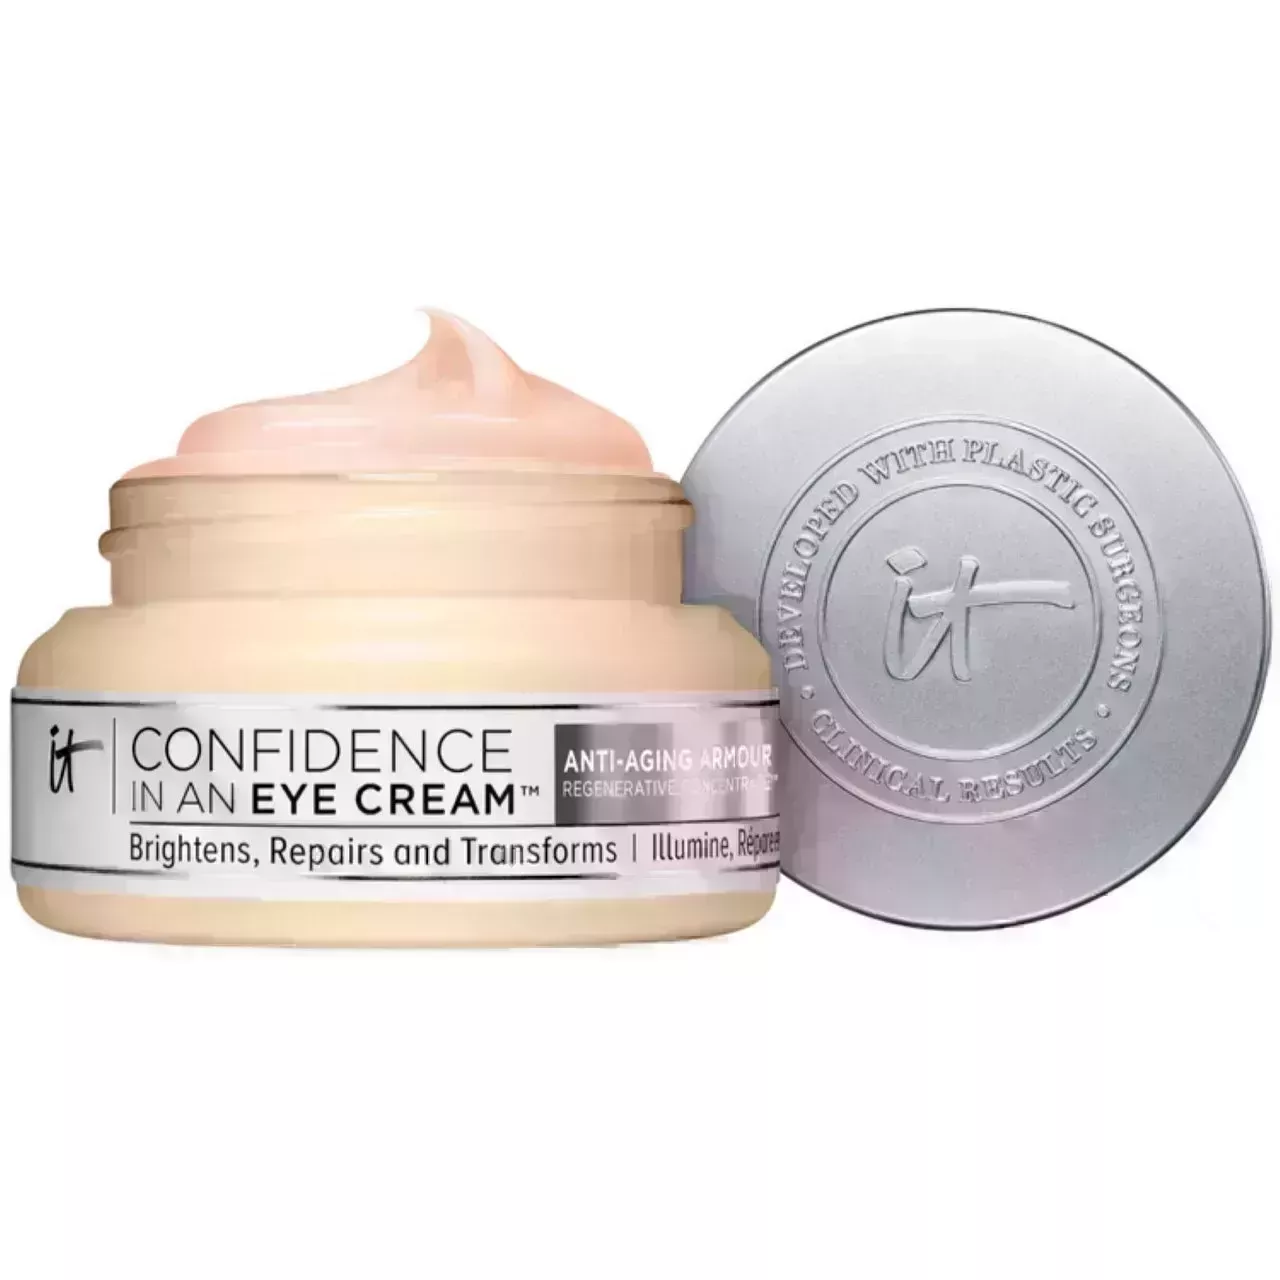 IT Cosmetics Confidence In An Eye Cream on white background